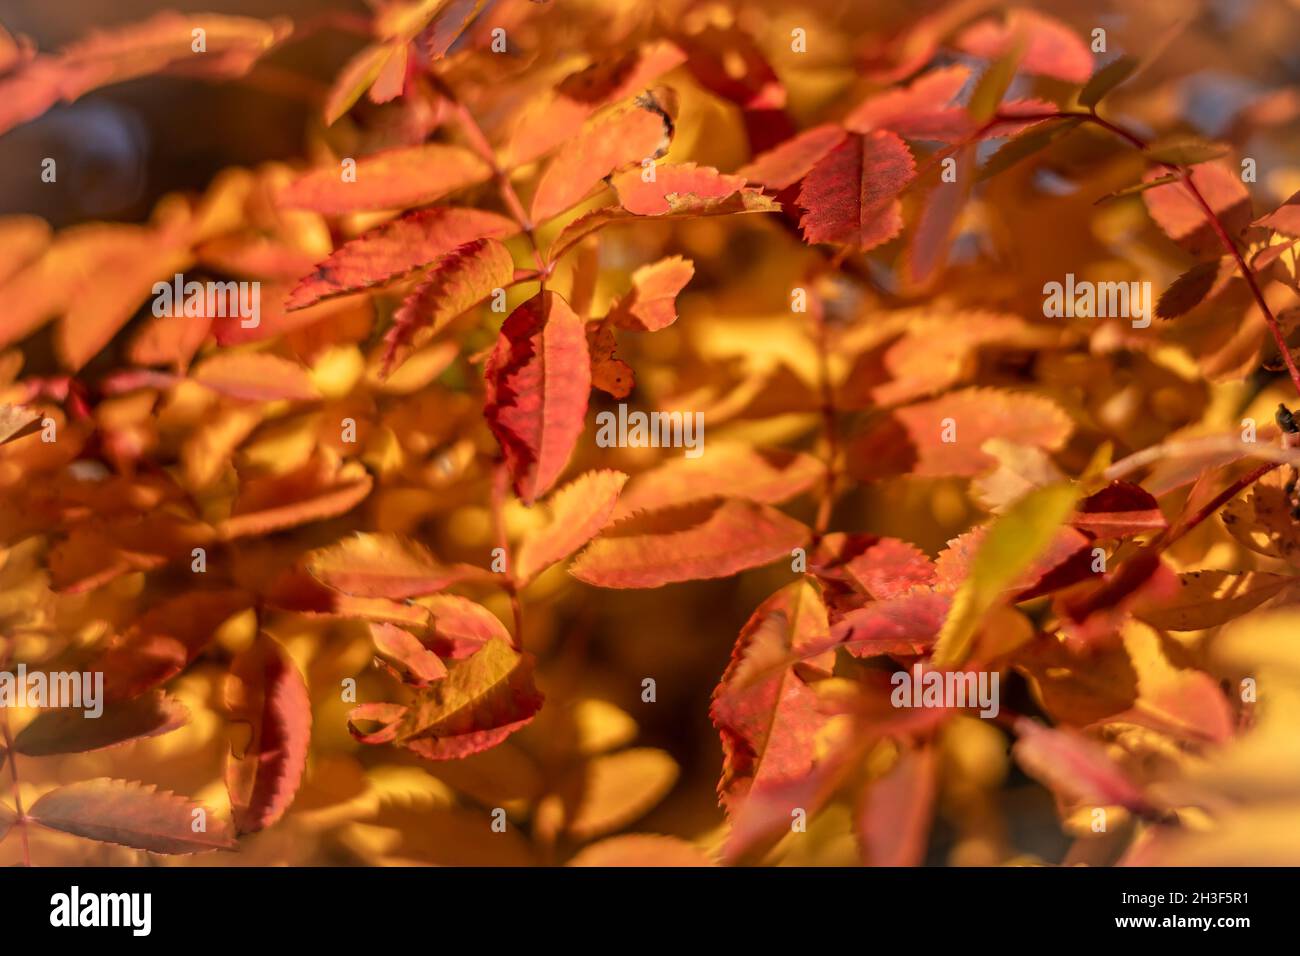 Colorful autumn leaves as background. Stock Photo